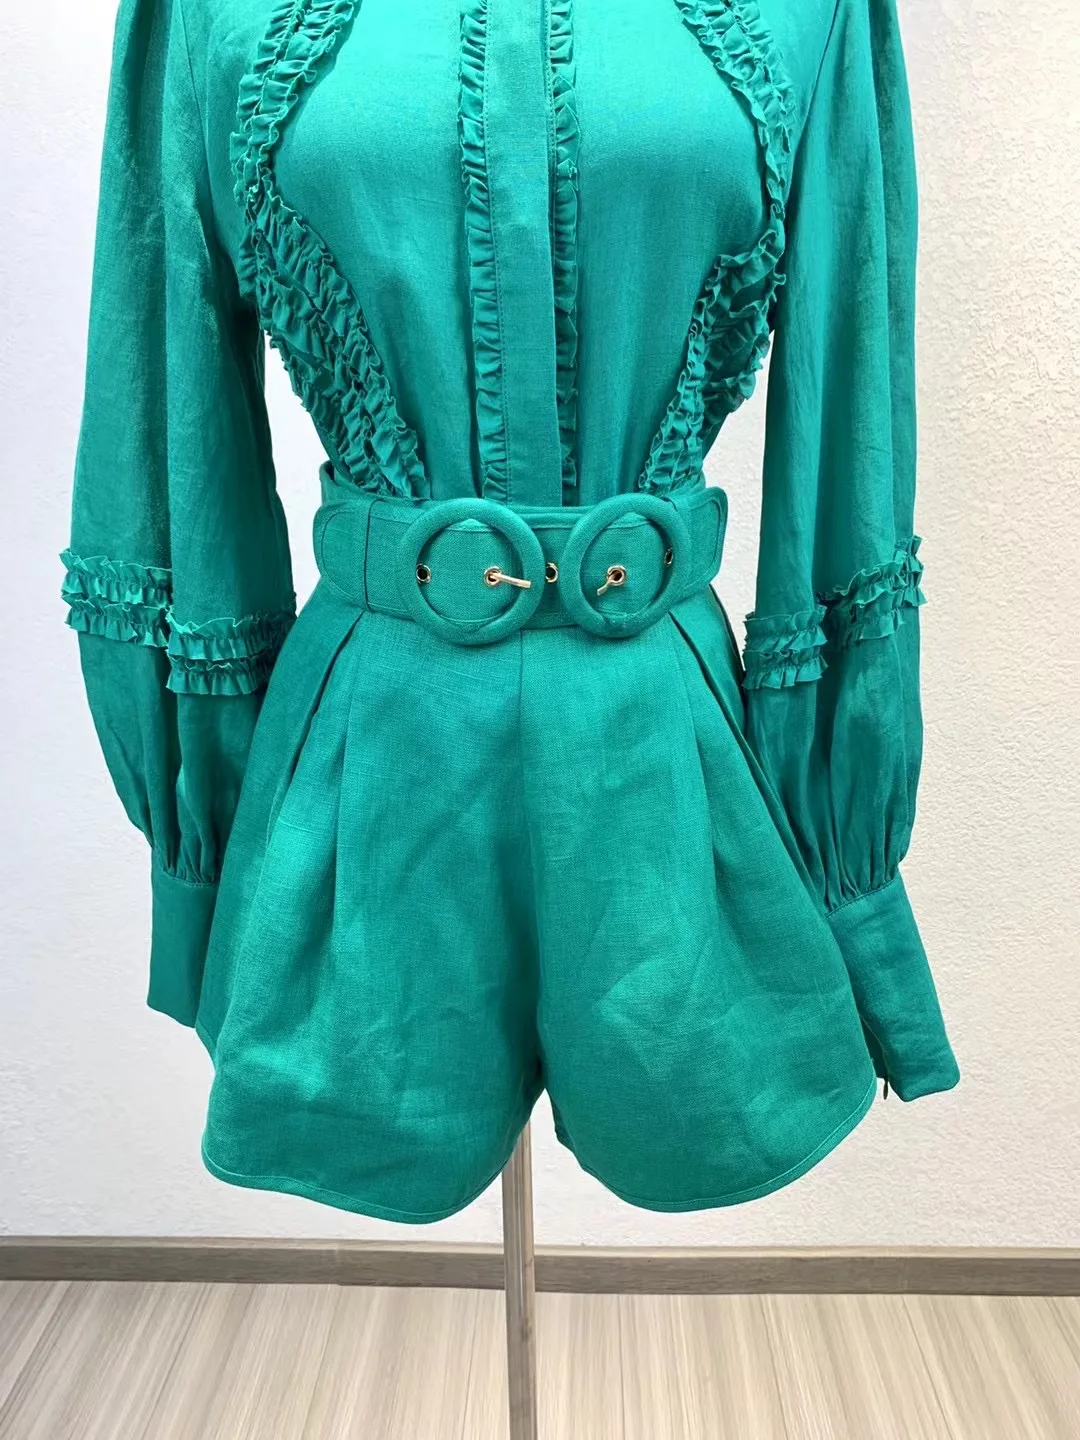 leather shorts Women Lantern Sleeve Green Ruffle Frill Ramie Blouse With Belted High Waist Shorts Two In One Set trendy clothes